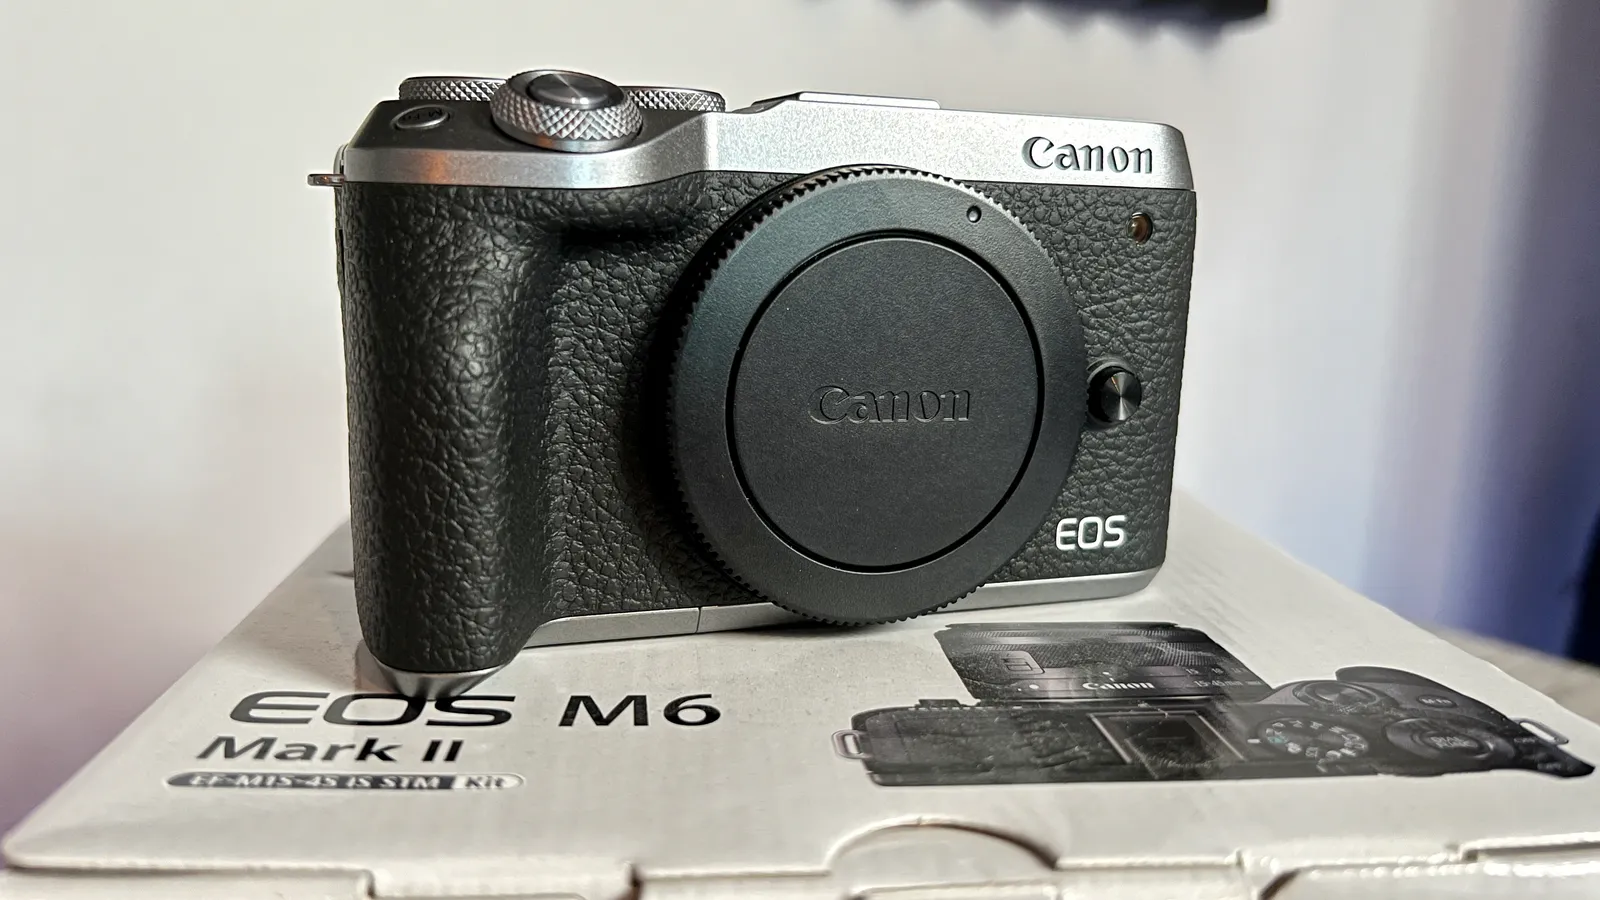 Canon EOS M6 Mark II Silver (Body) + Accessories From Kevin 